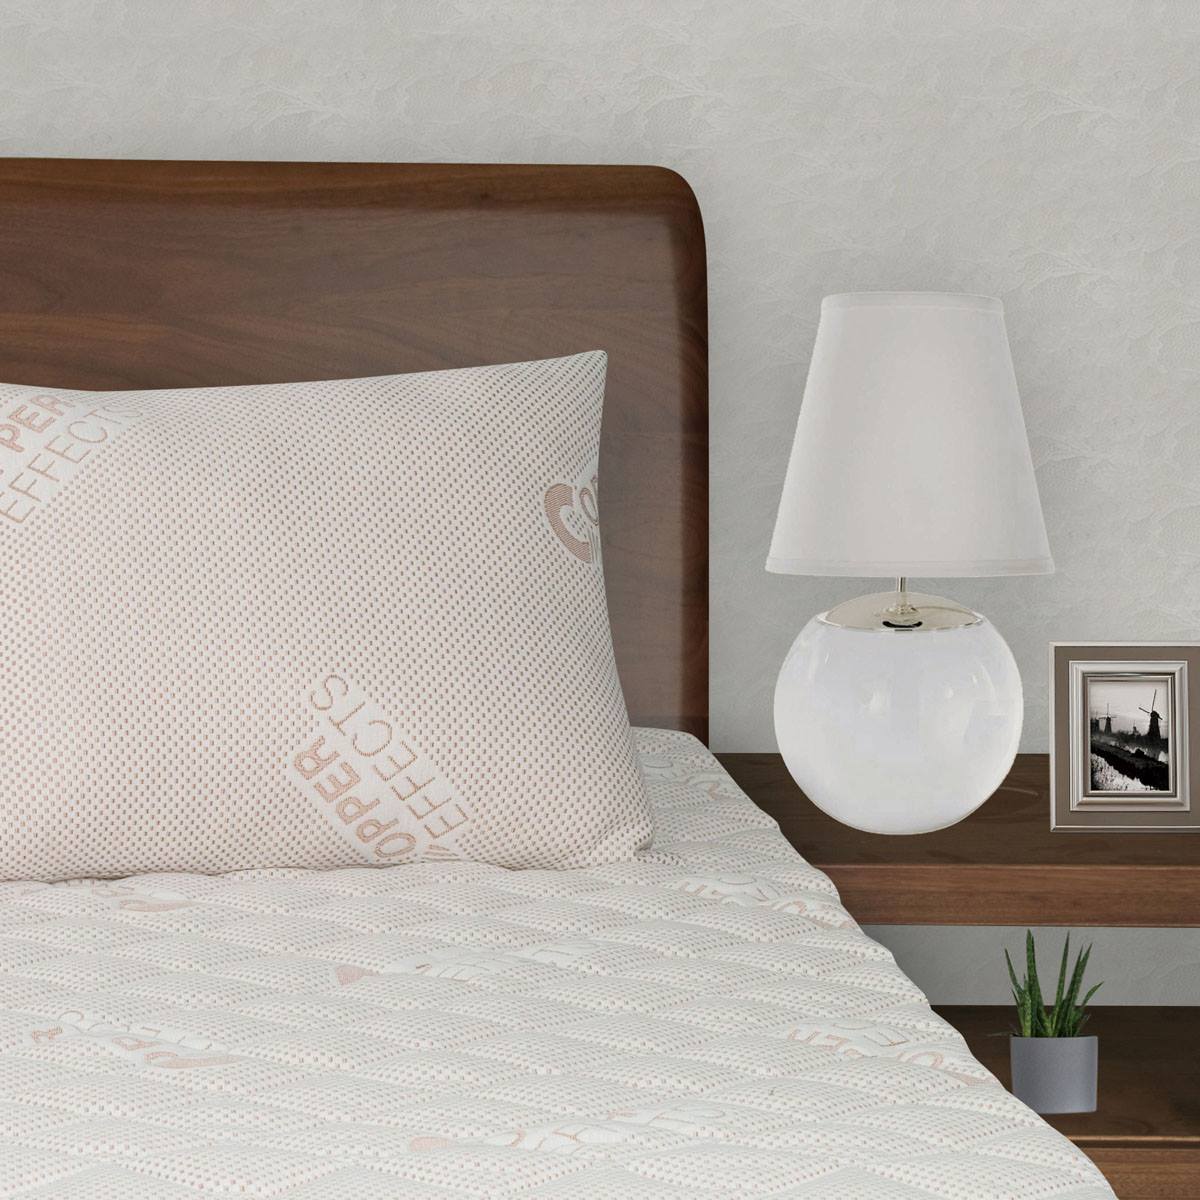 All-In-One Copper Effects(tm) Fitted Mattress Pad